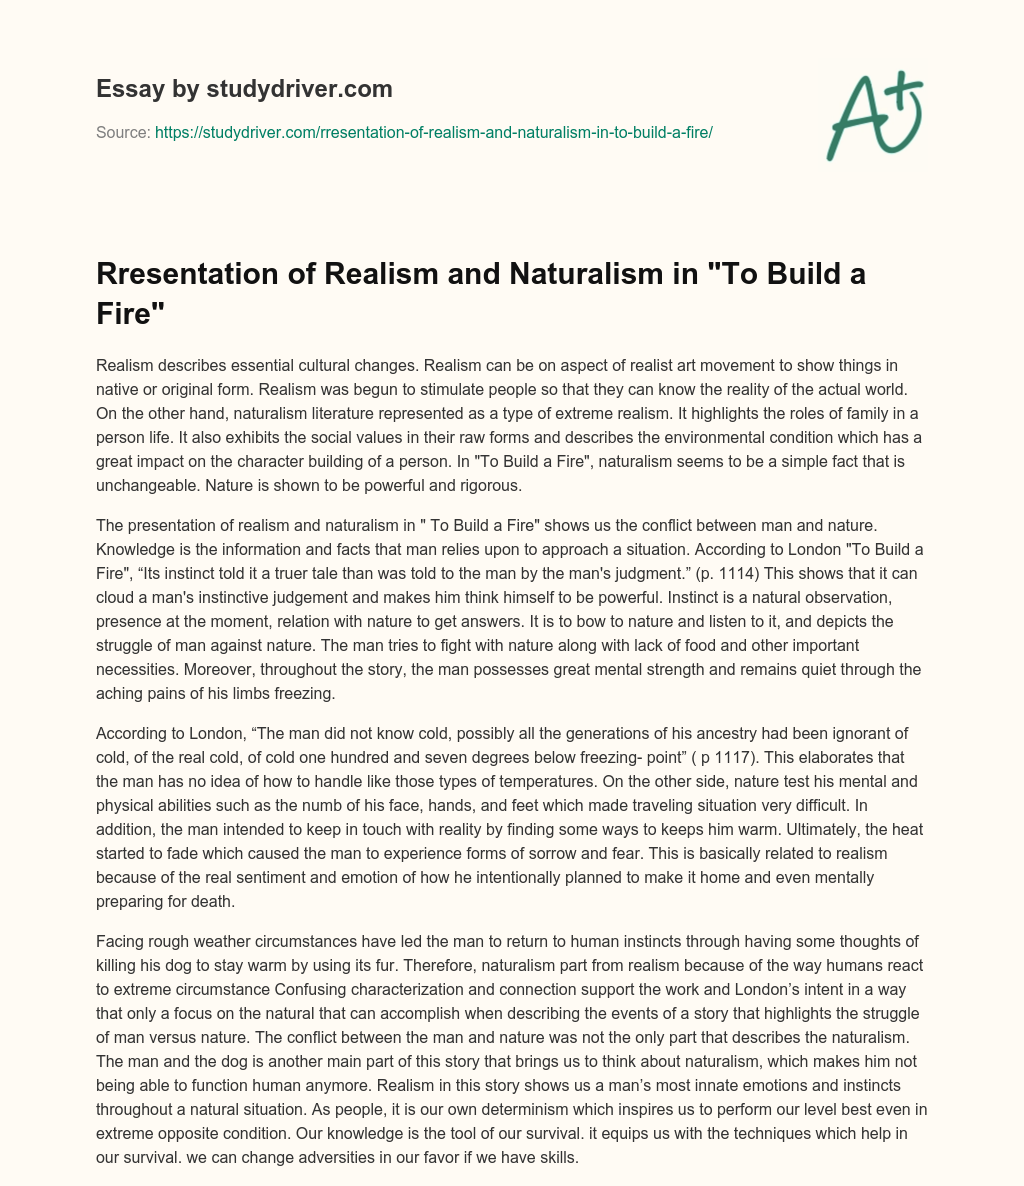 Rresentation of Realism and Naturalism in “To Build a Fire” essay